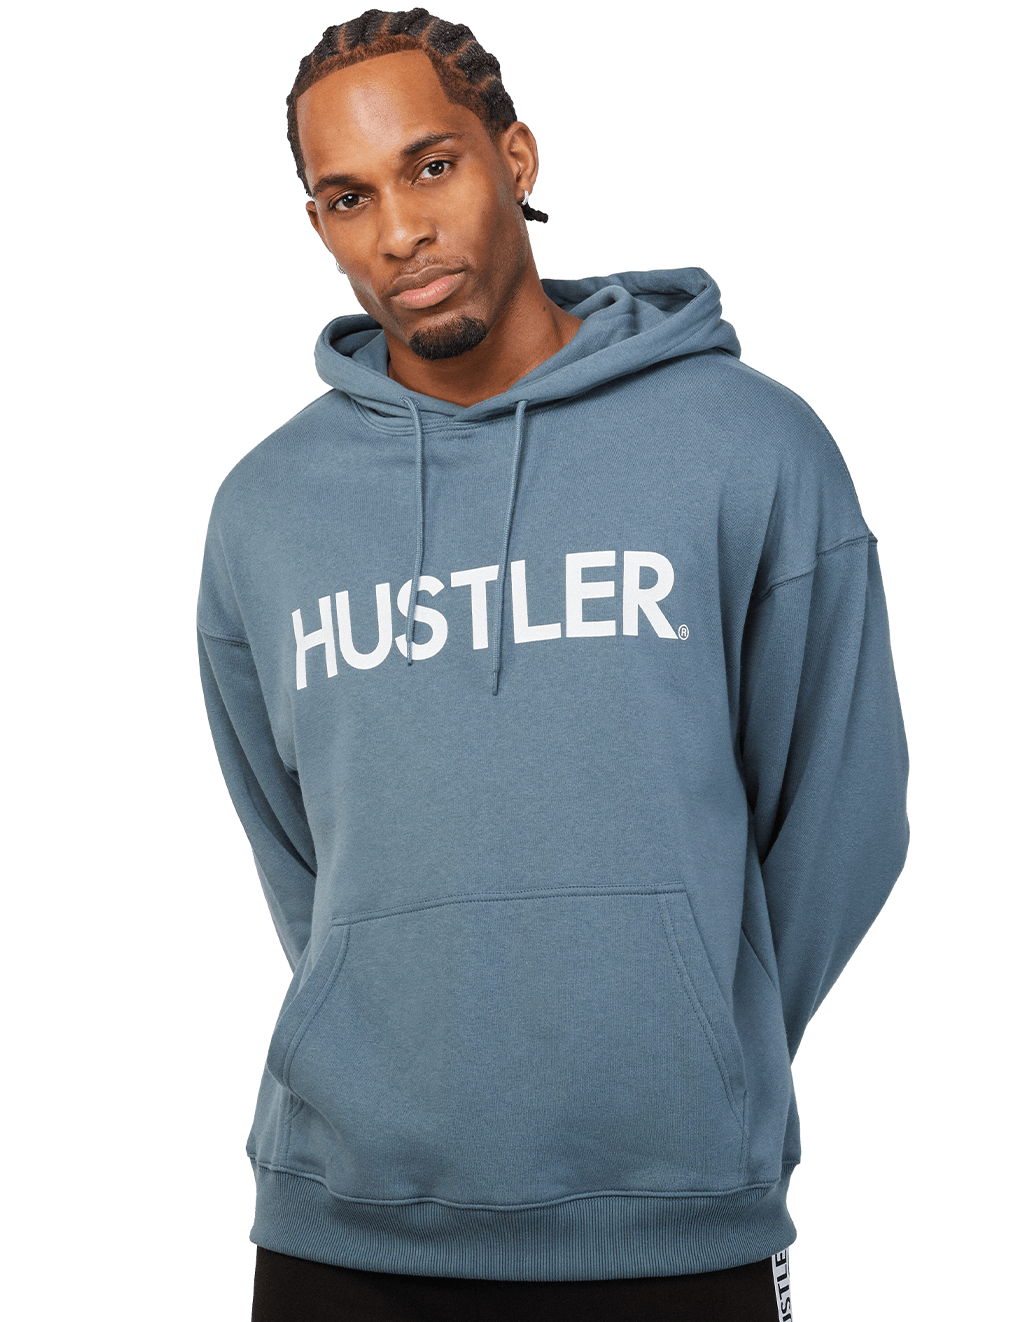 HUSTLER Classic Logo Pull Over Hoodie - Charcoal Front 